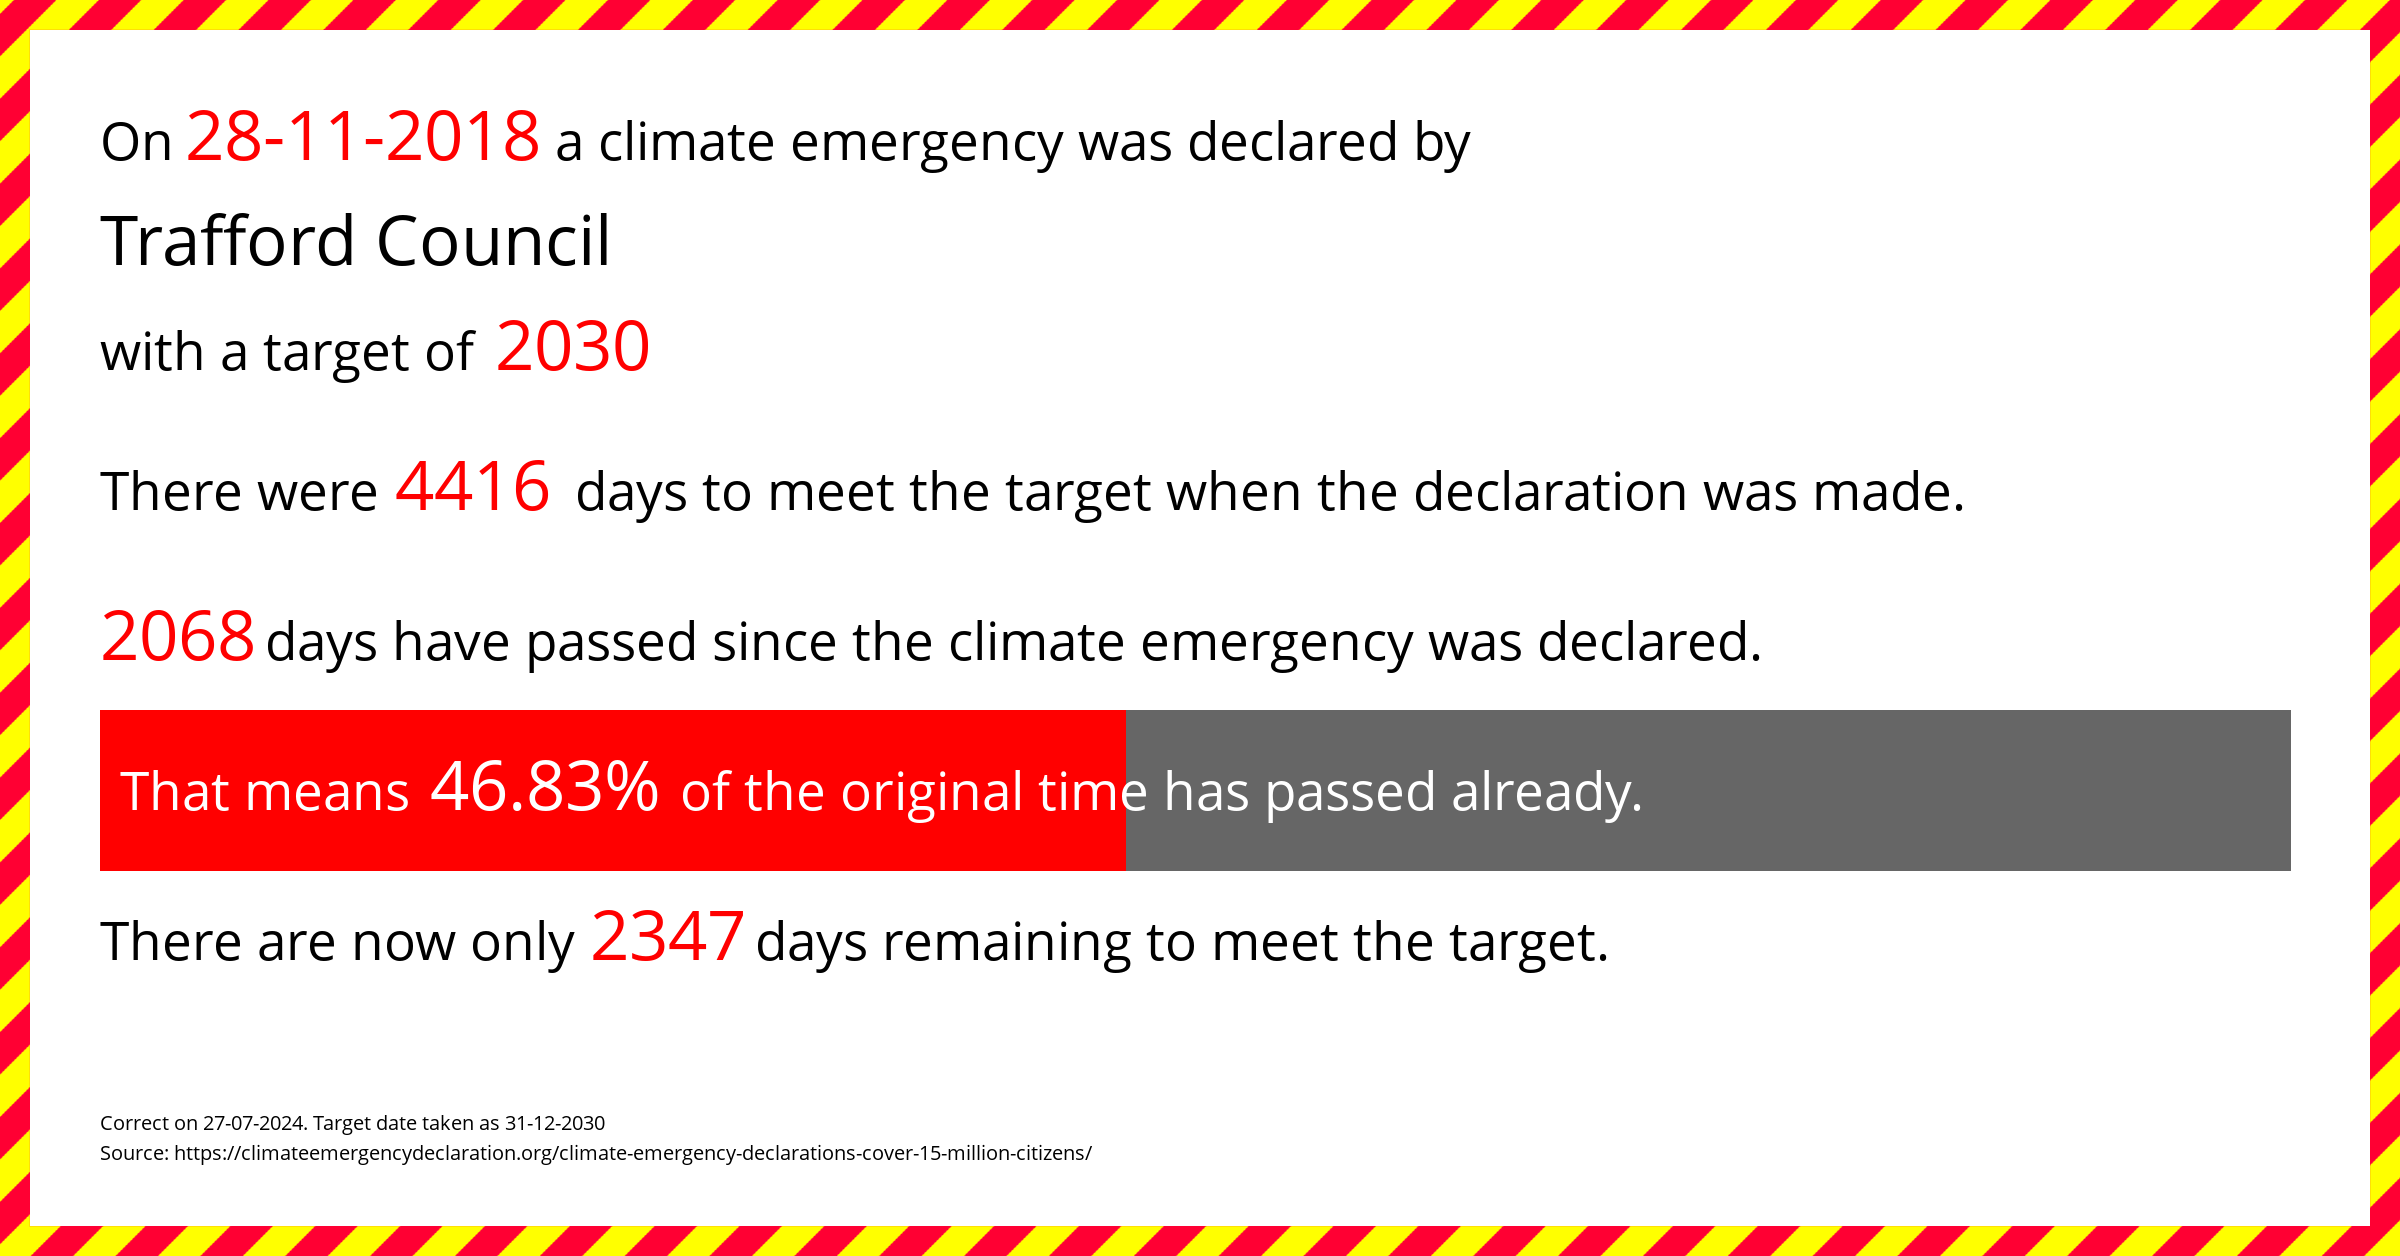 Trafford Council declared a Climate emergency on Wednesday 28th November 2018, with a target of 2030.